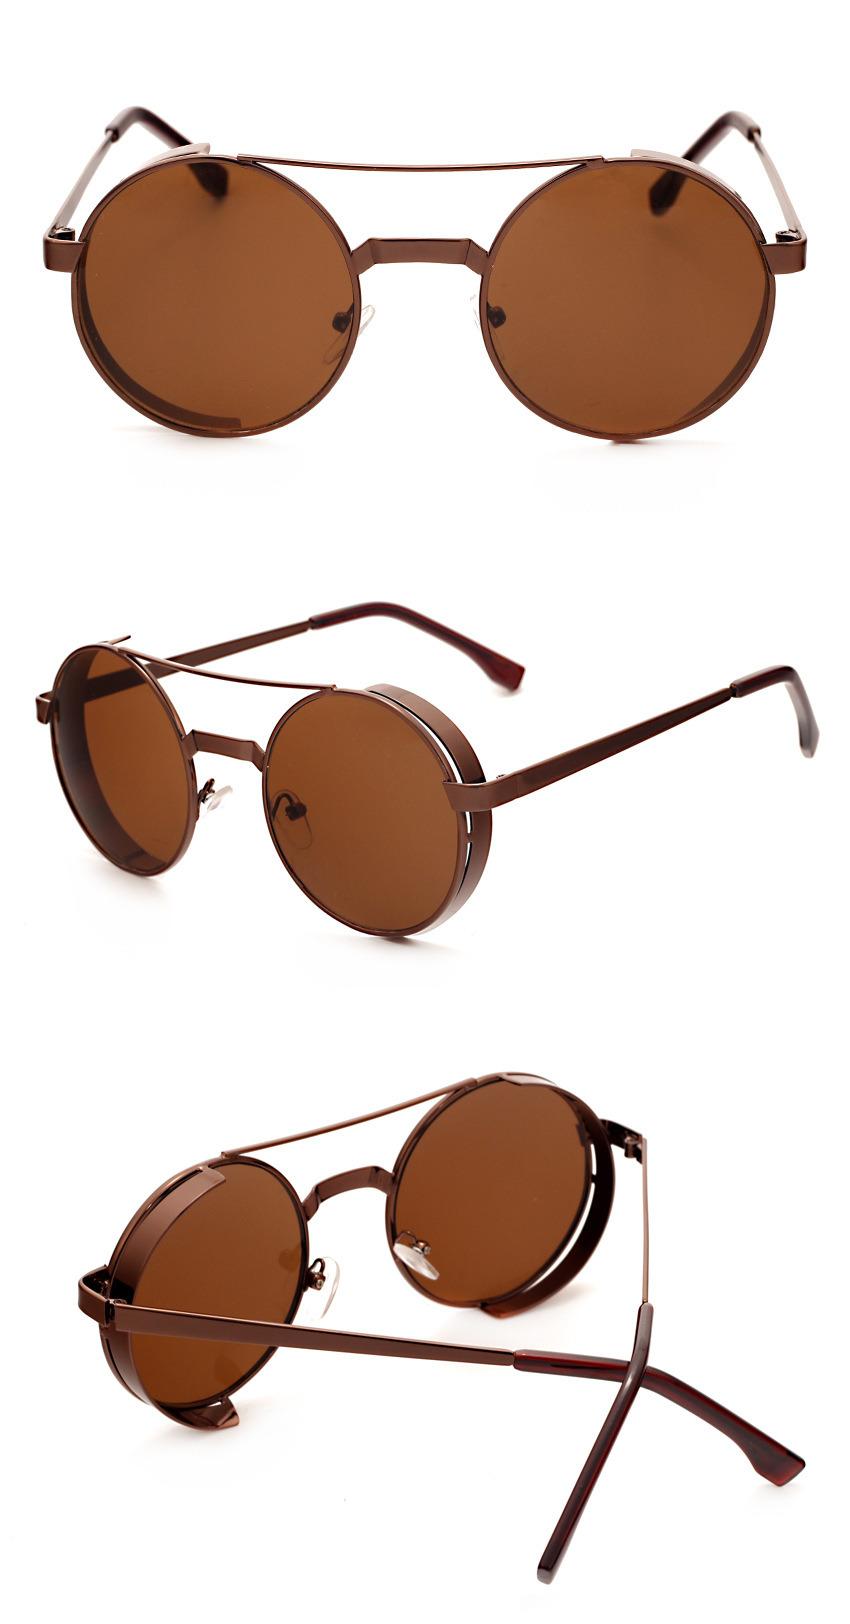 Luxury Punk Round Frame Metal Sunglasses for Men and Women